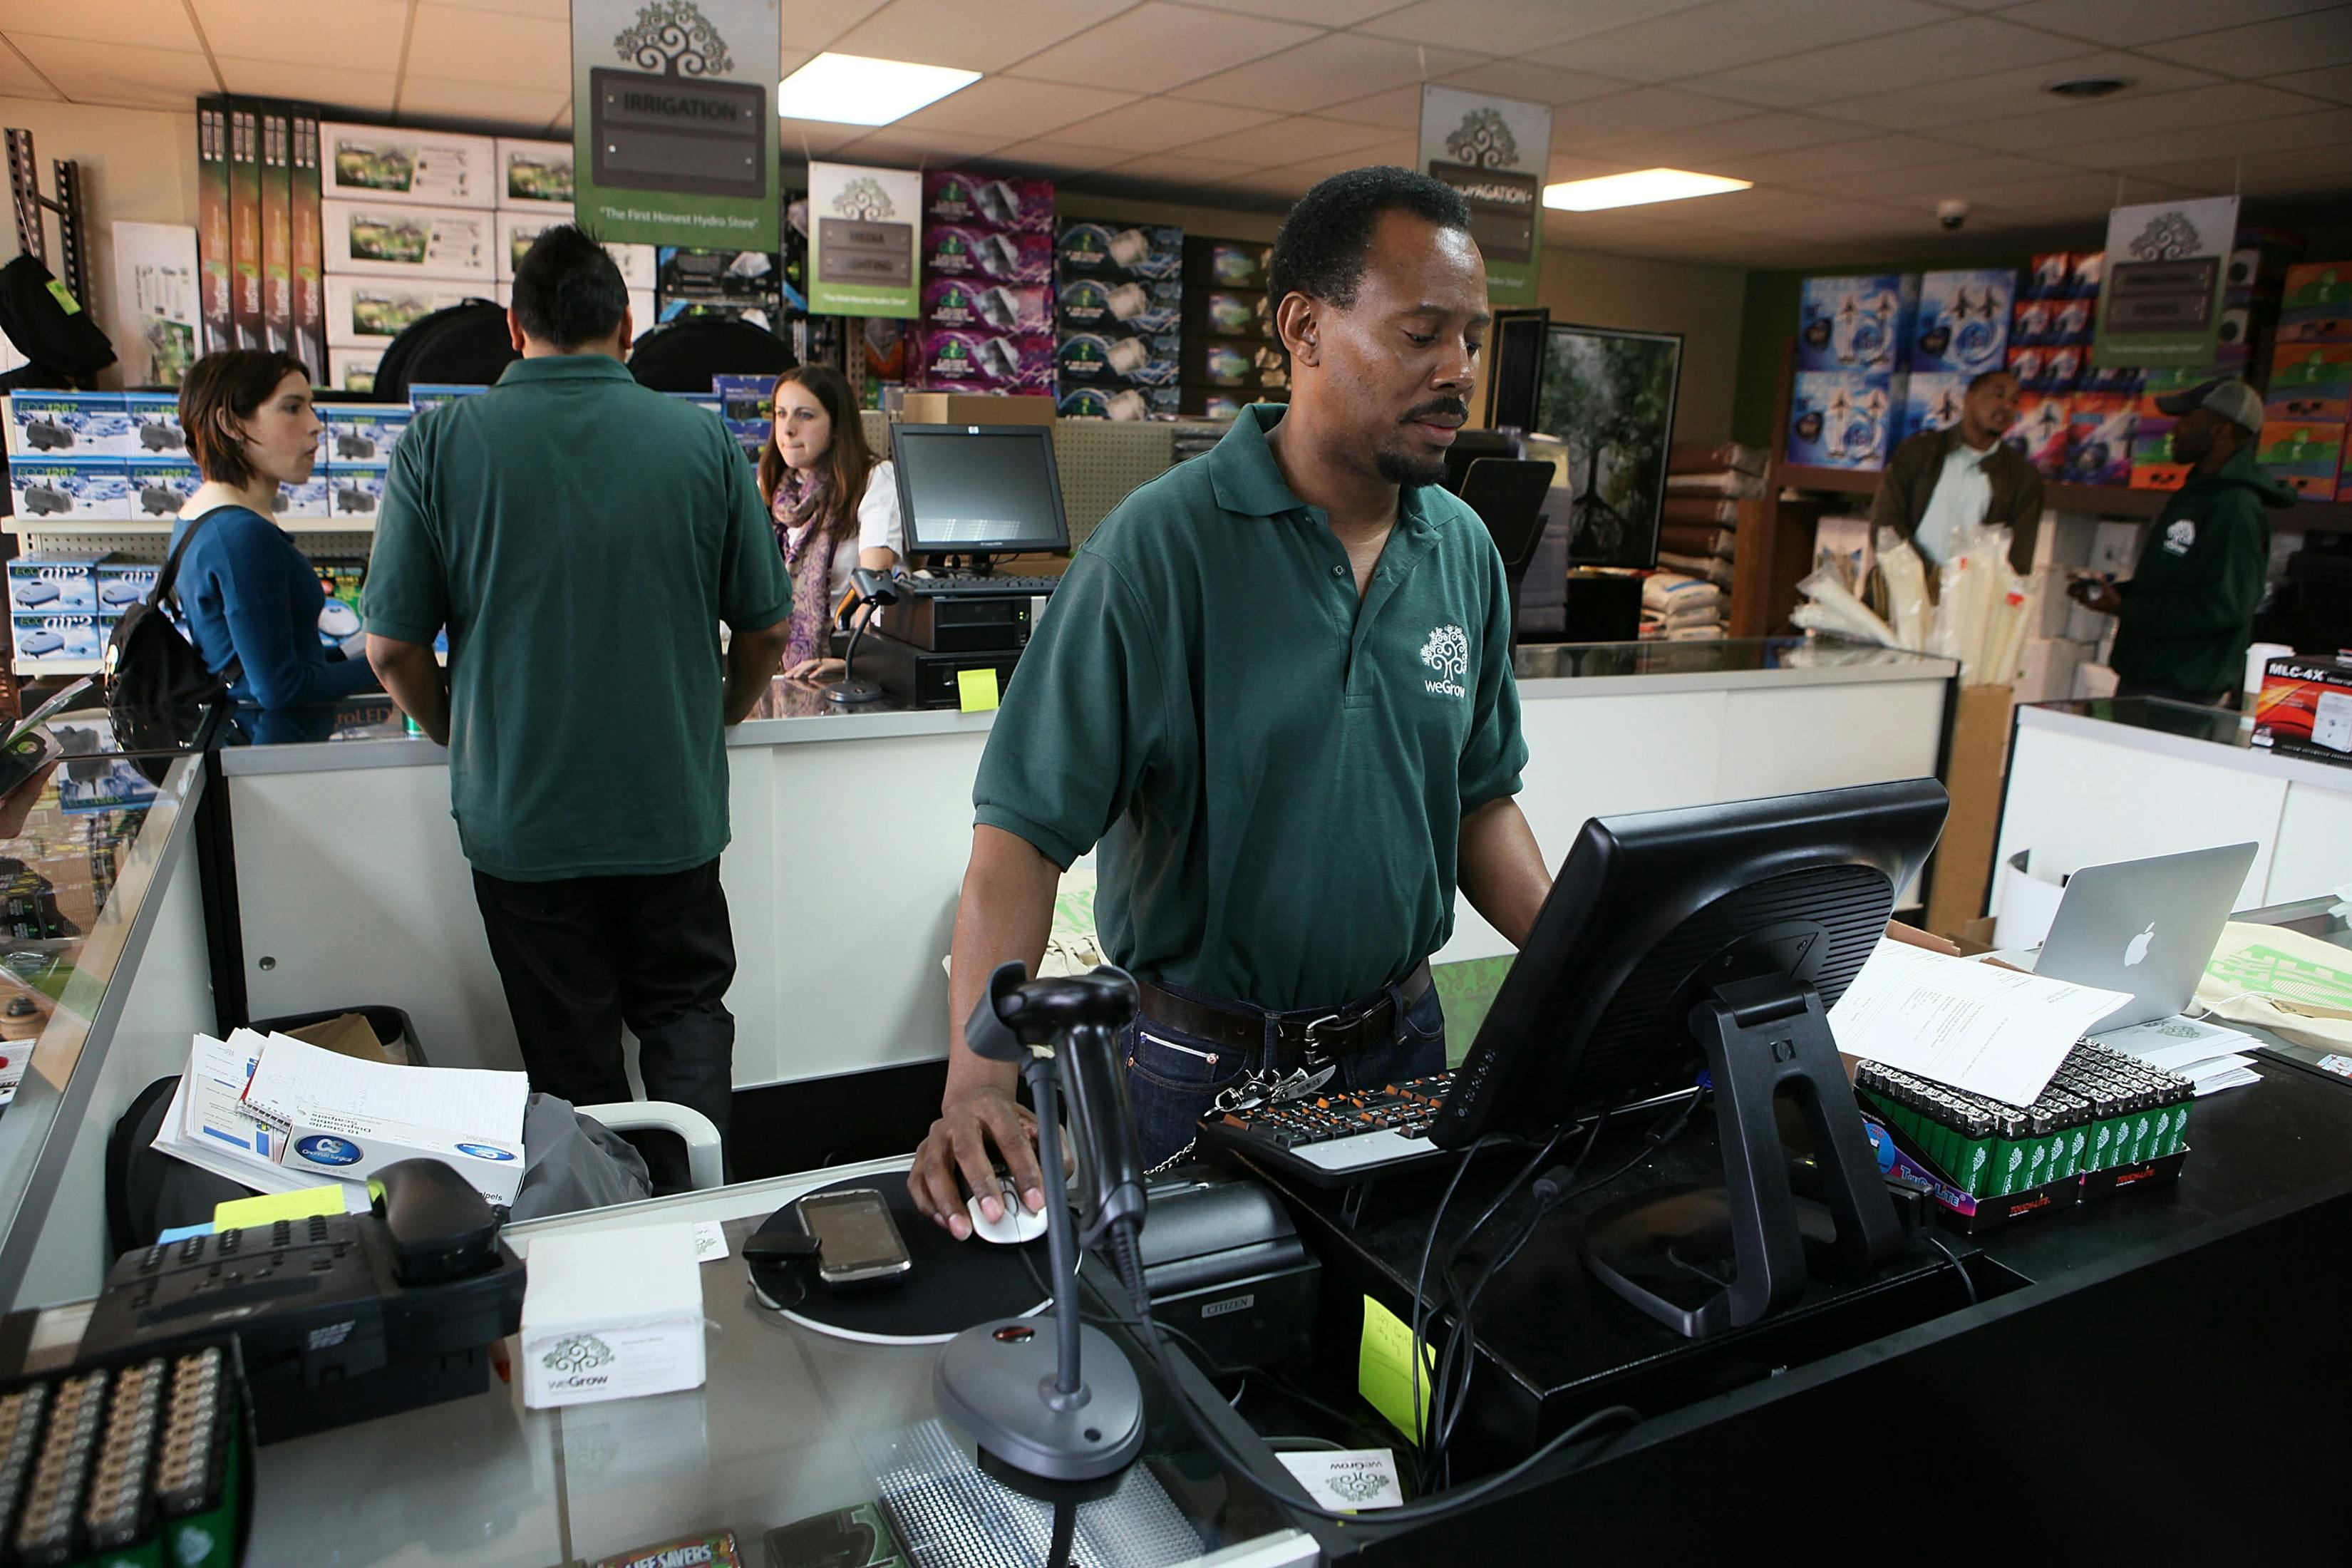 Walmart of Weed 2 of 2 How a Sports Gambling Case Could Impact Legal Weed